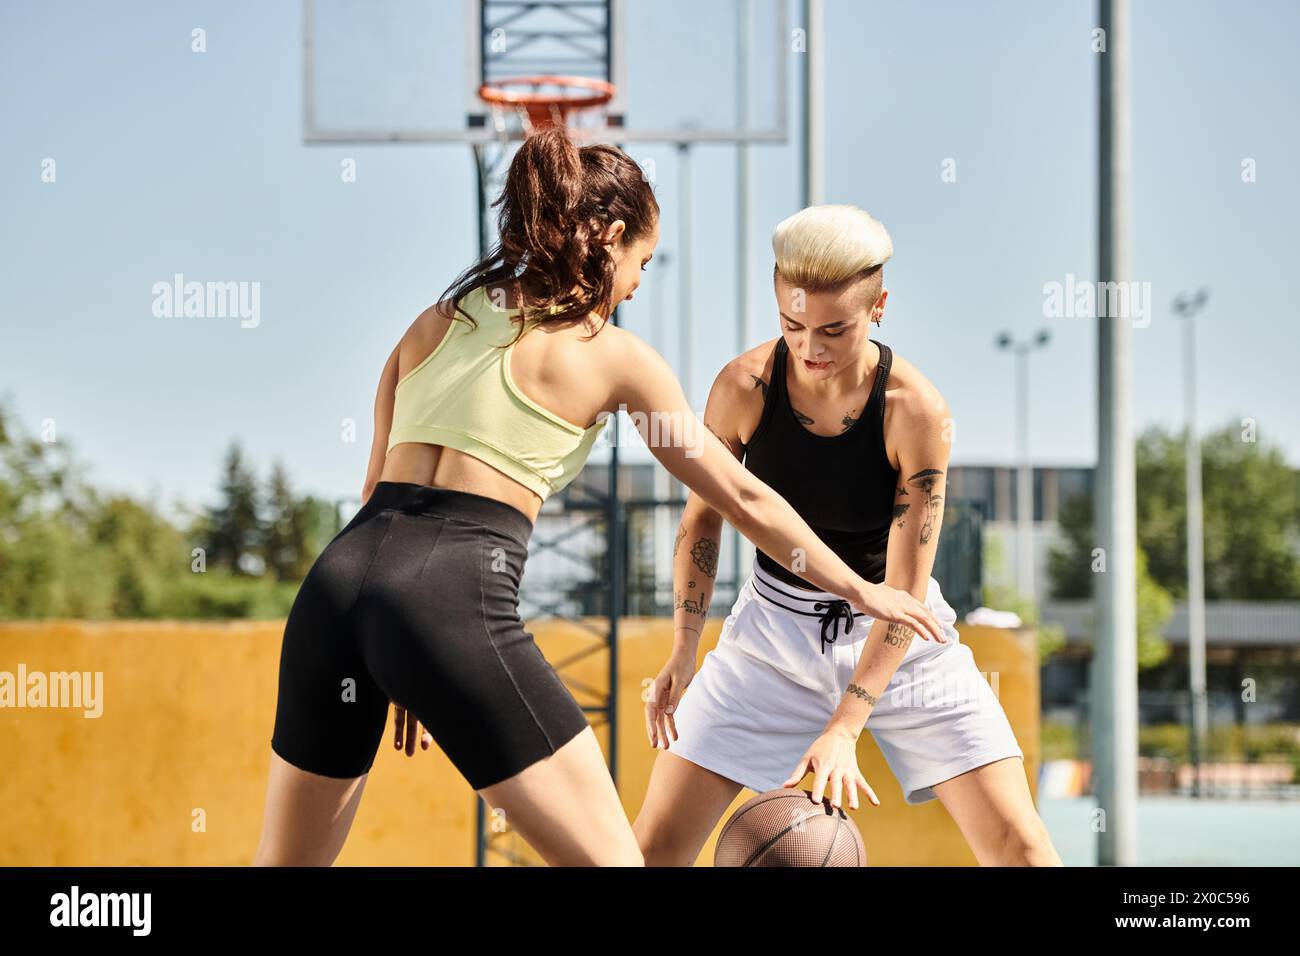 women engage in a friendly game of basketball on an outdoor court, showcasing their athletic skills and competitive spirit. Stock Photo